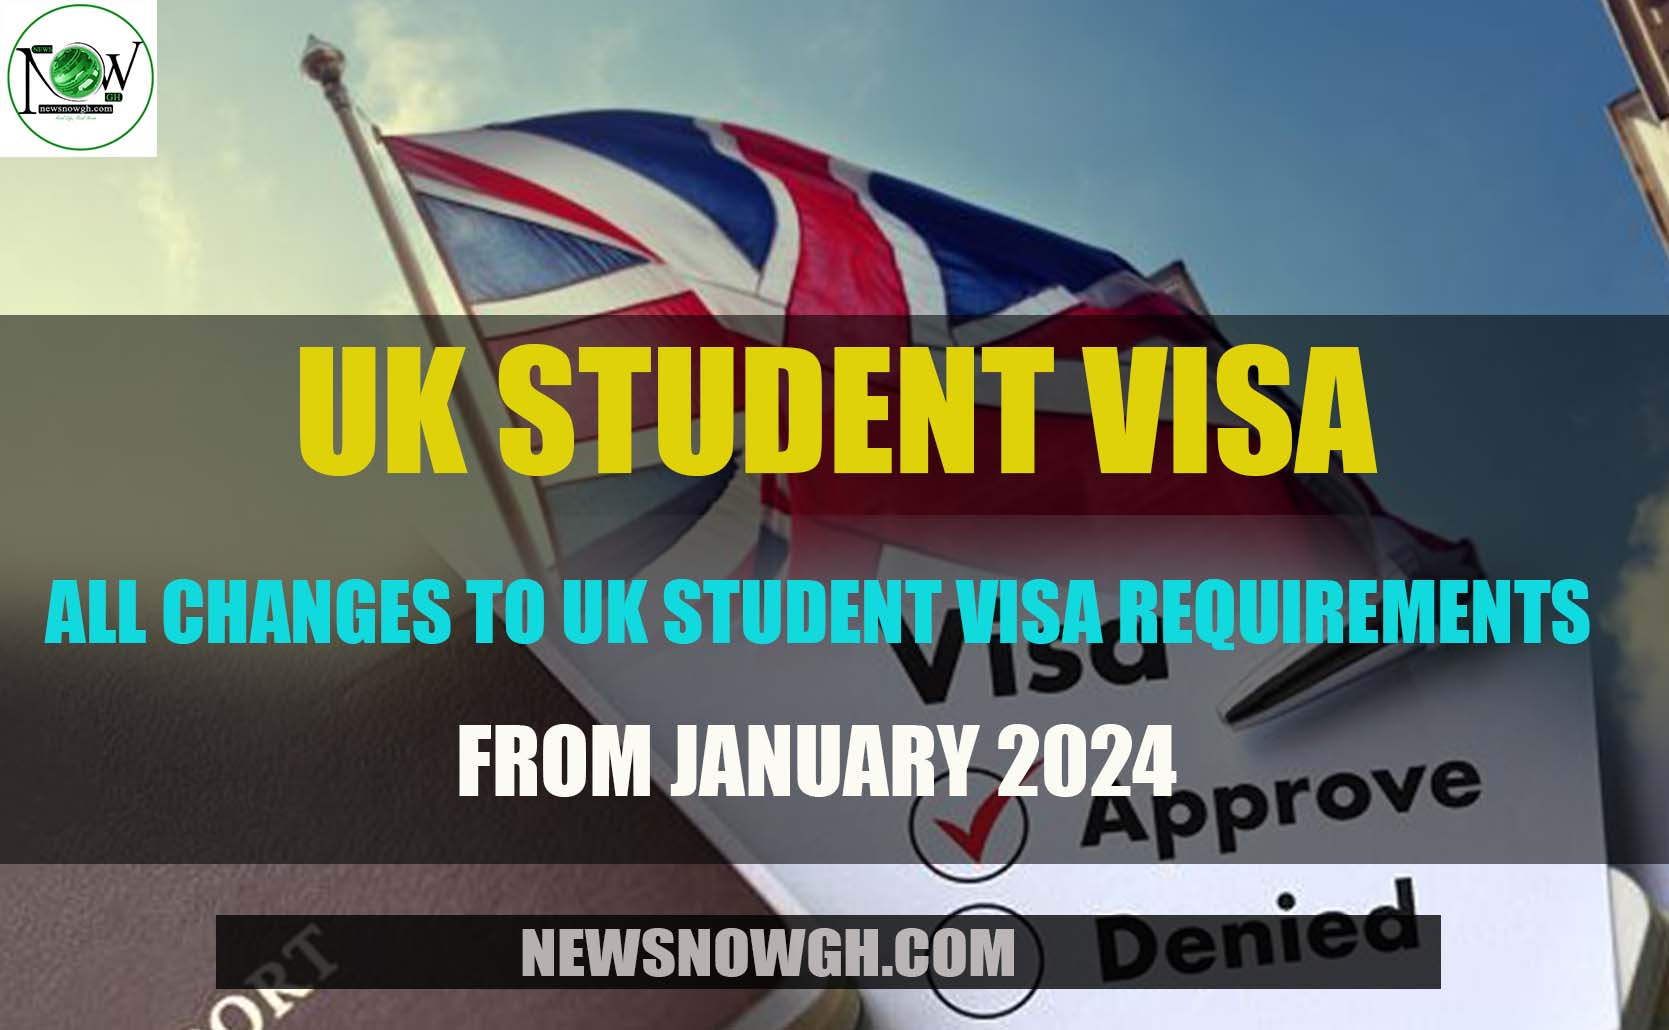 All Changes to UK Student Visa Requirements from January 2024